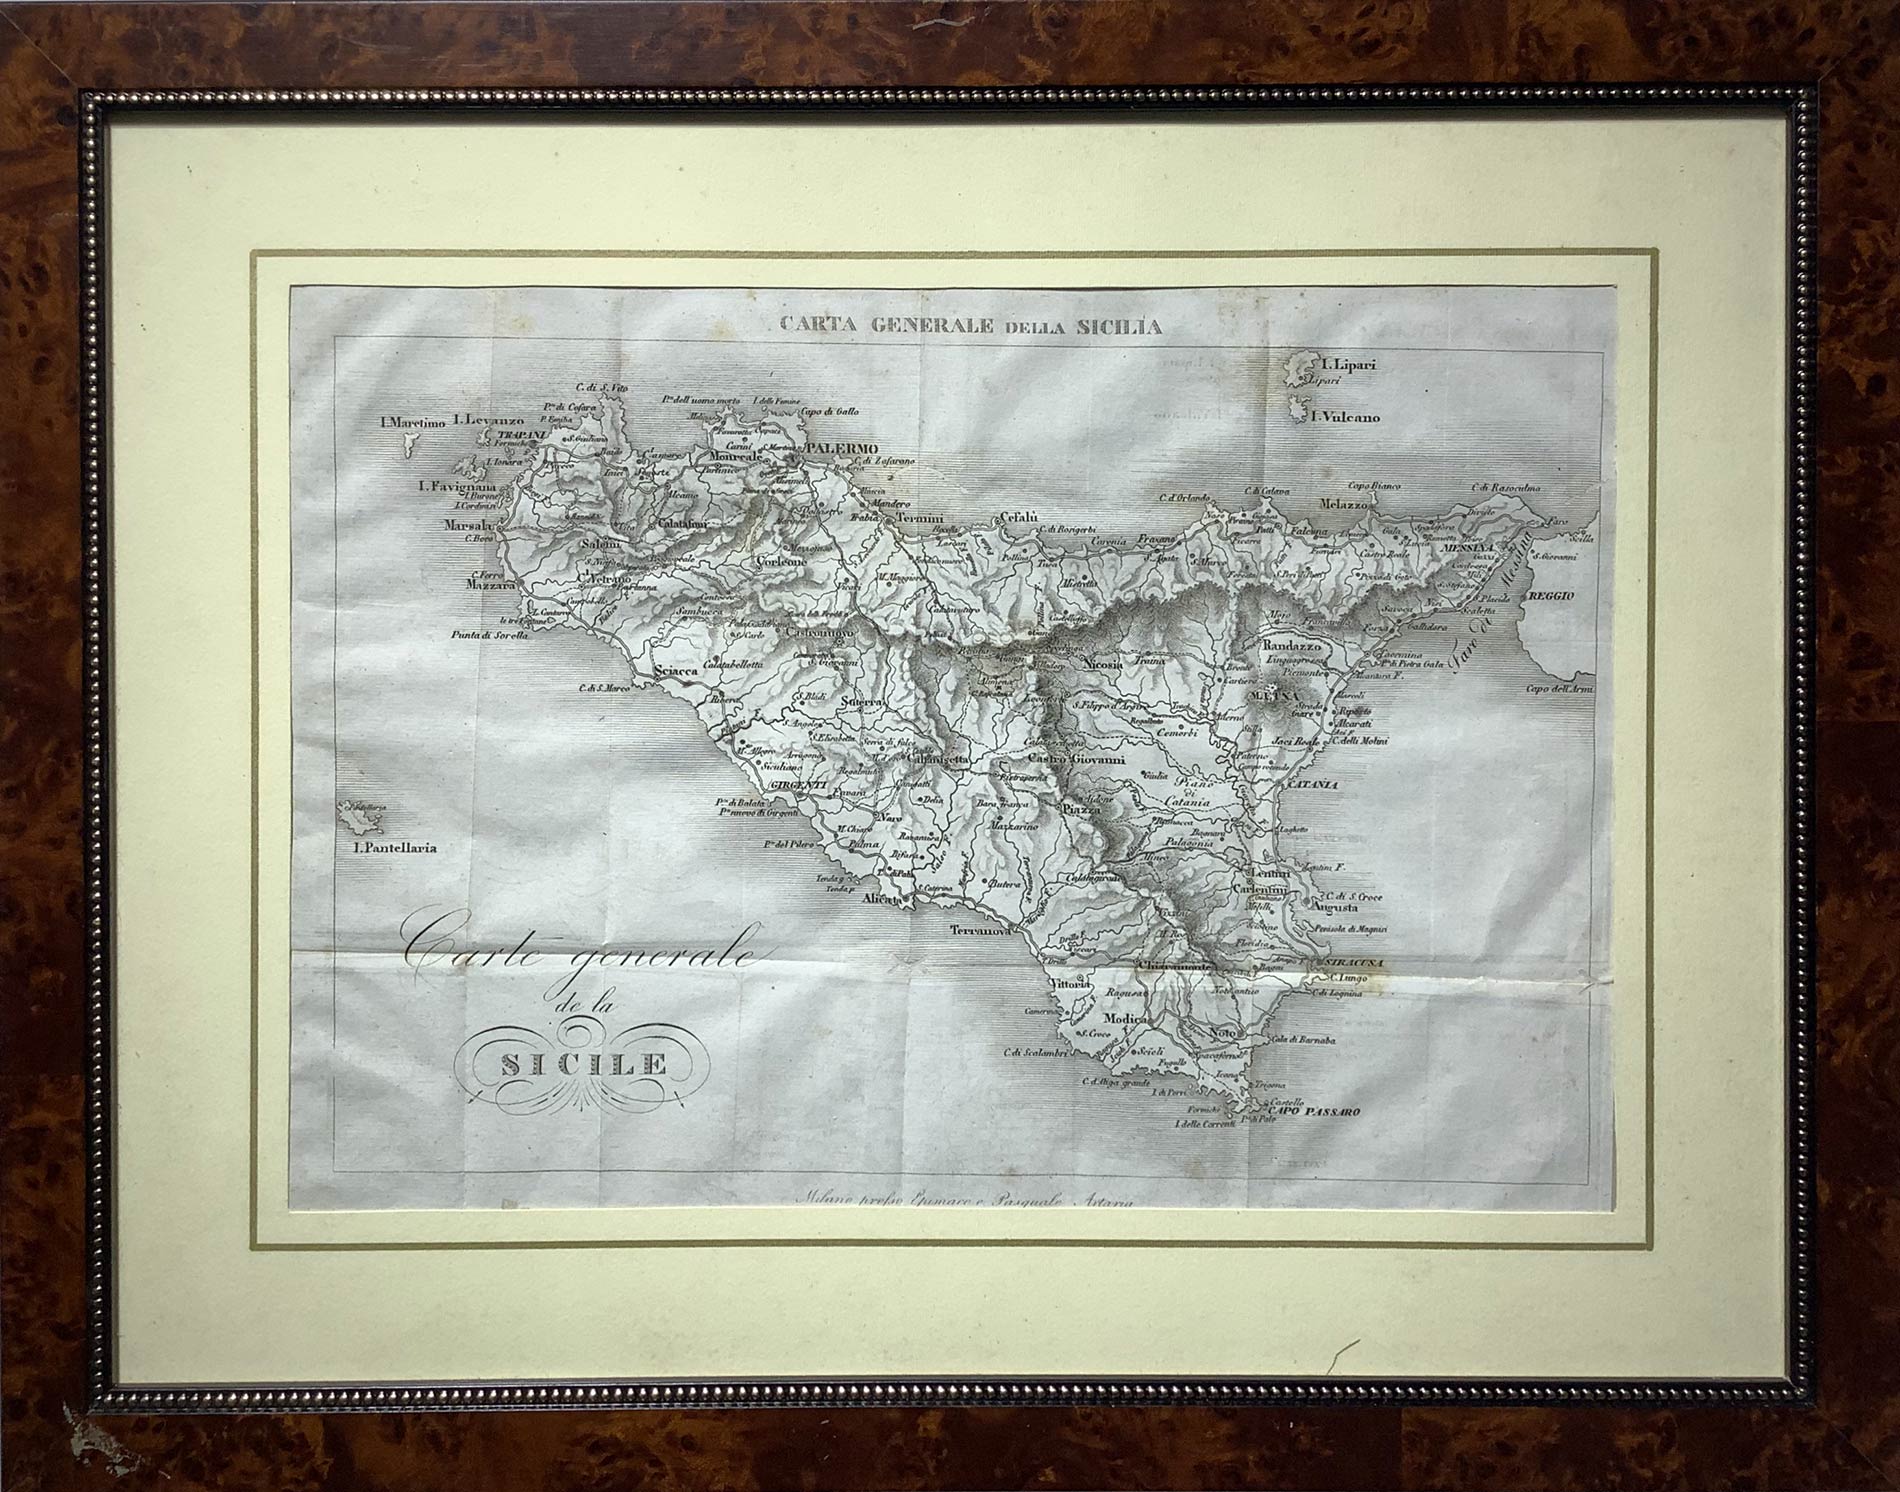 General map of Sicily, 1830, Milan, Epimaco and Pasquale Artaria from "New Guide of Travelers".